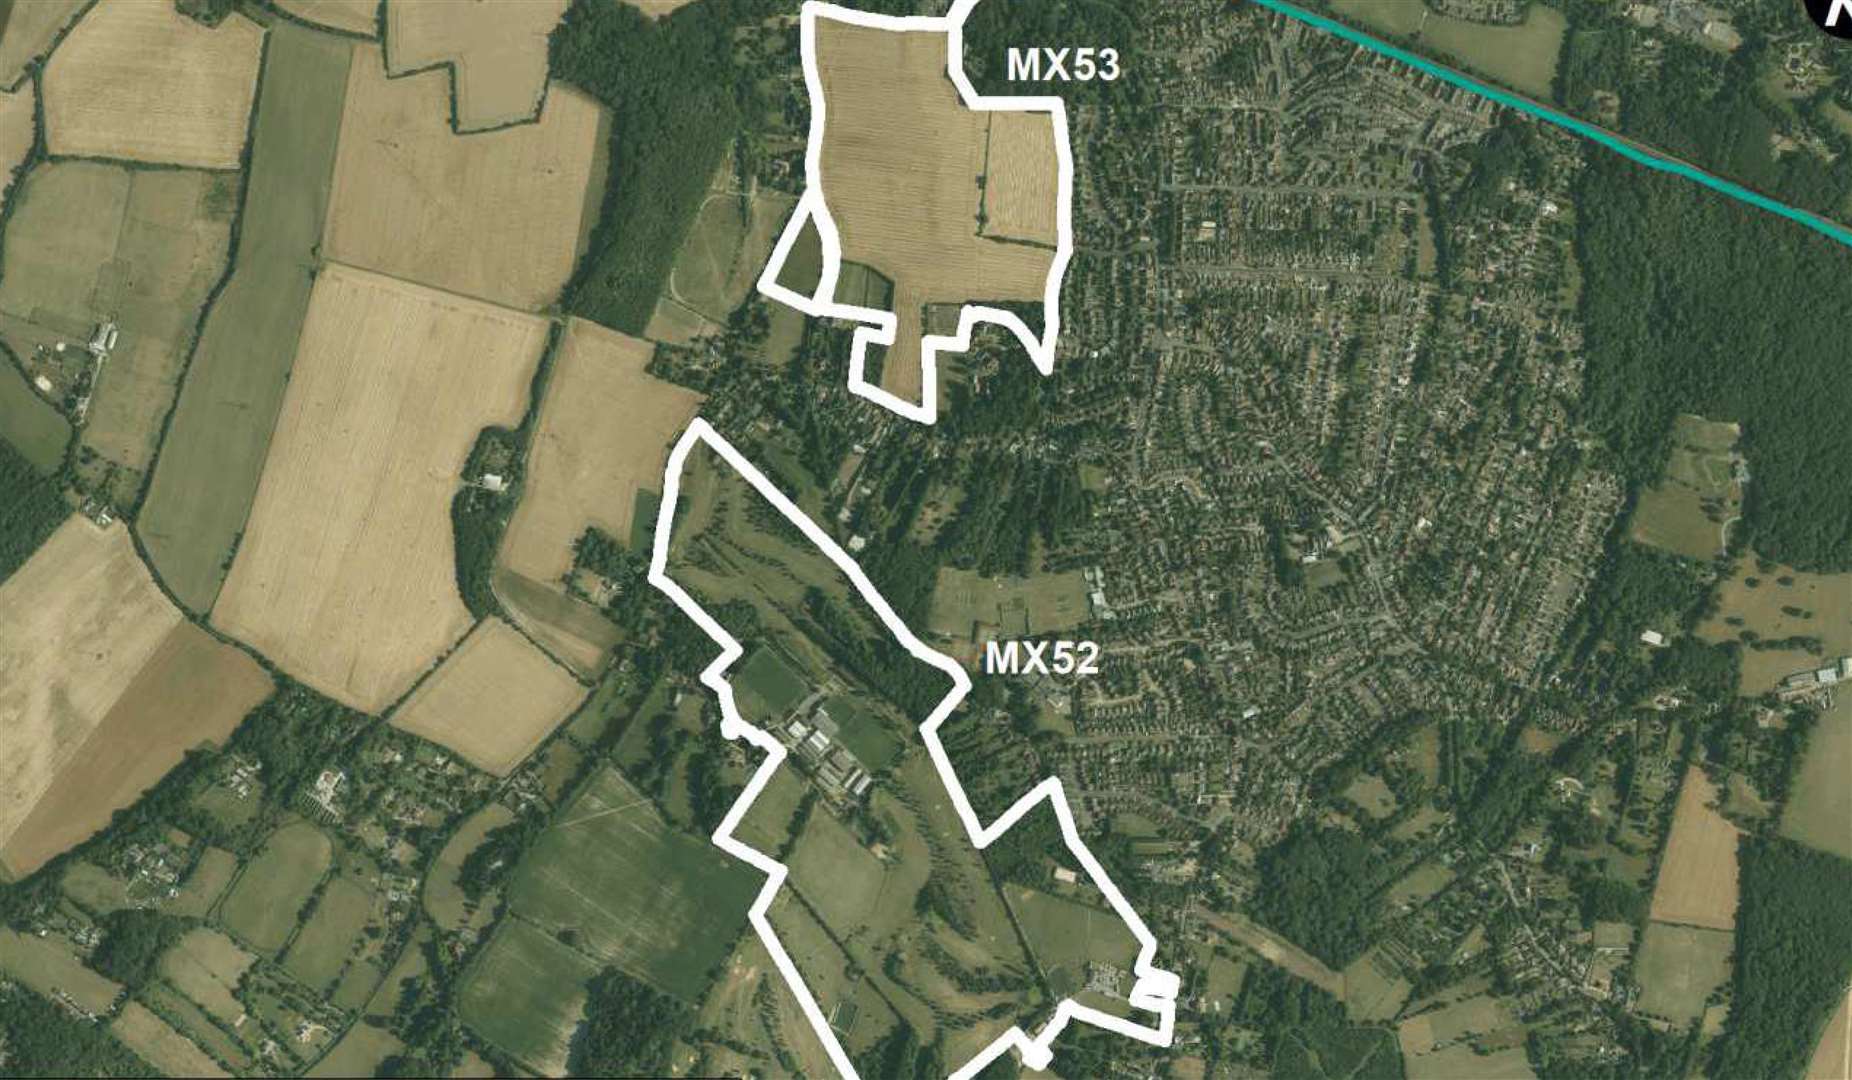 A map showing the sites of the two proposed developments